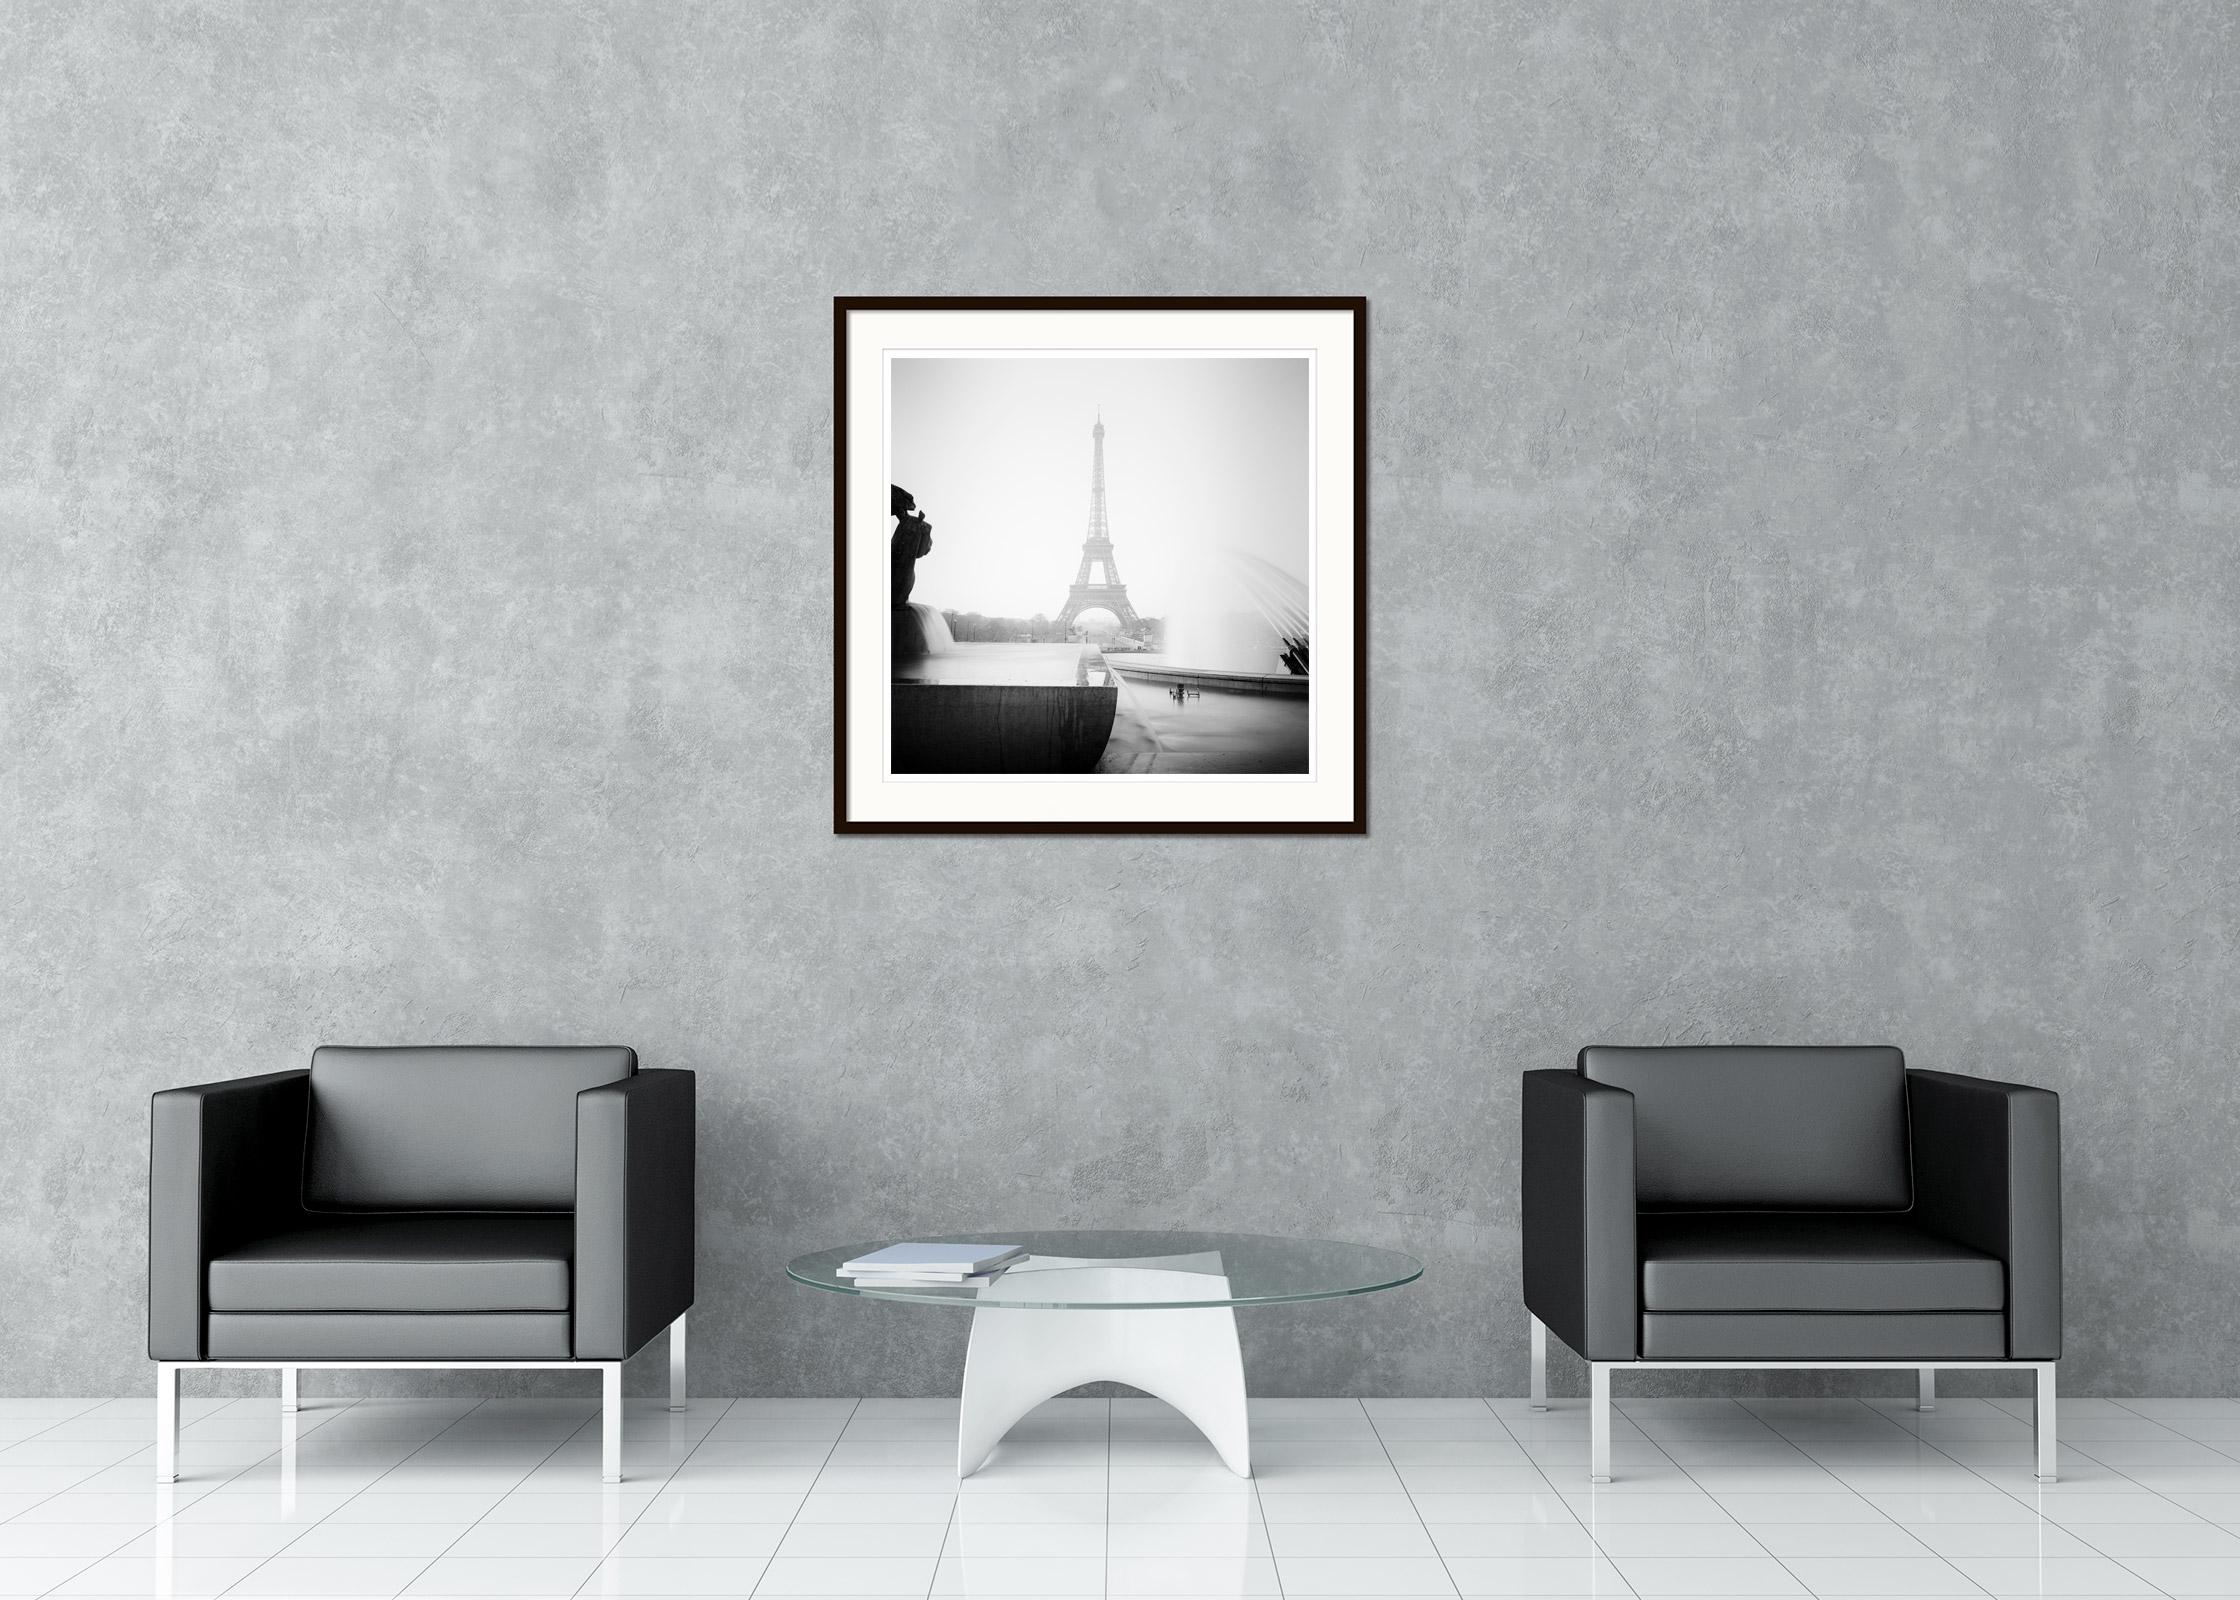 Black and White Fine Art Cityscape Photography. Archival pigment ink print, edition of 9. Signed, titled, dated and numbered by artist. Certificate of authenticity included. Printed with 4cm white border.
International award winner photographer